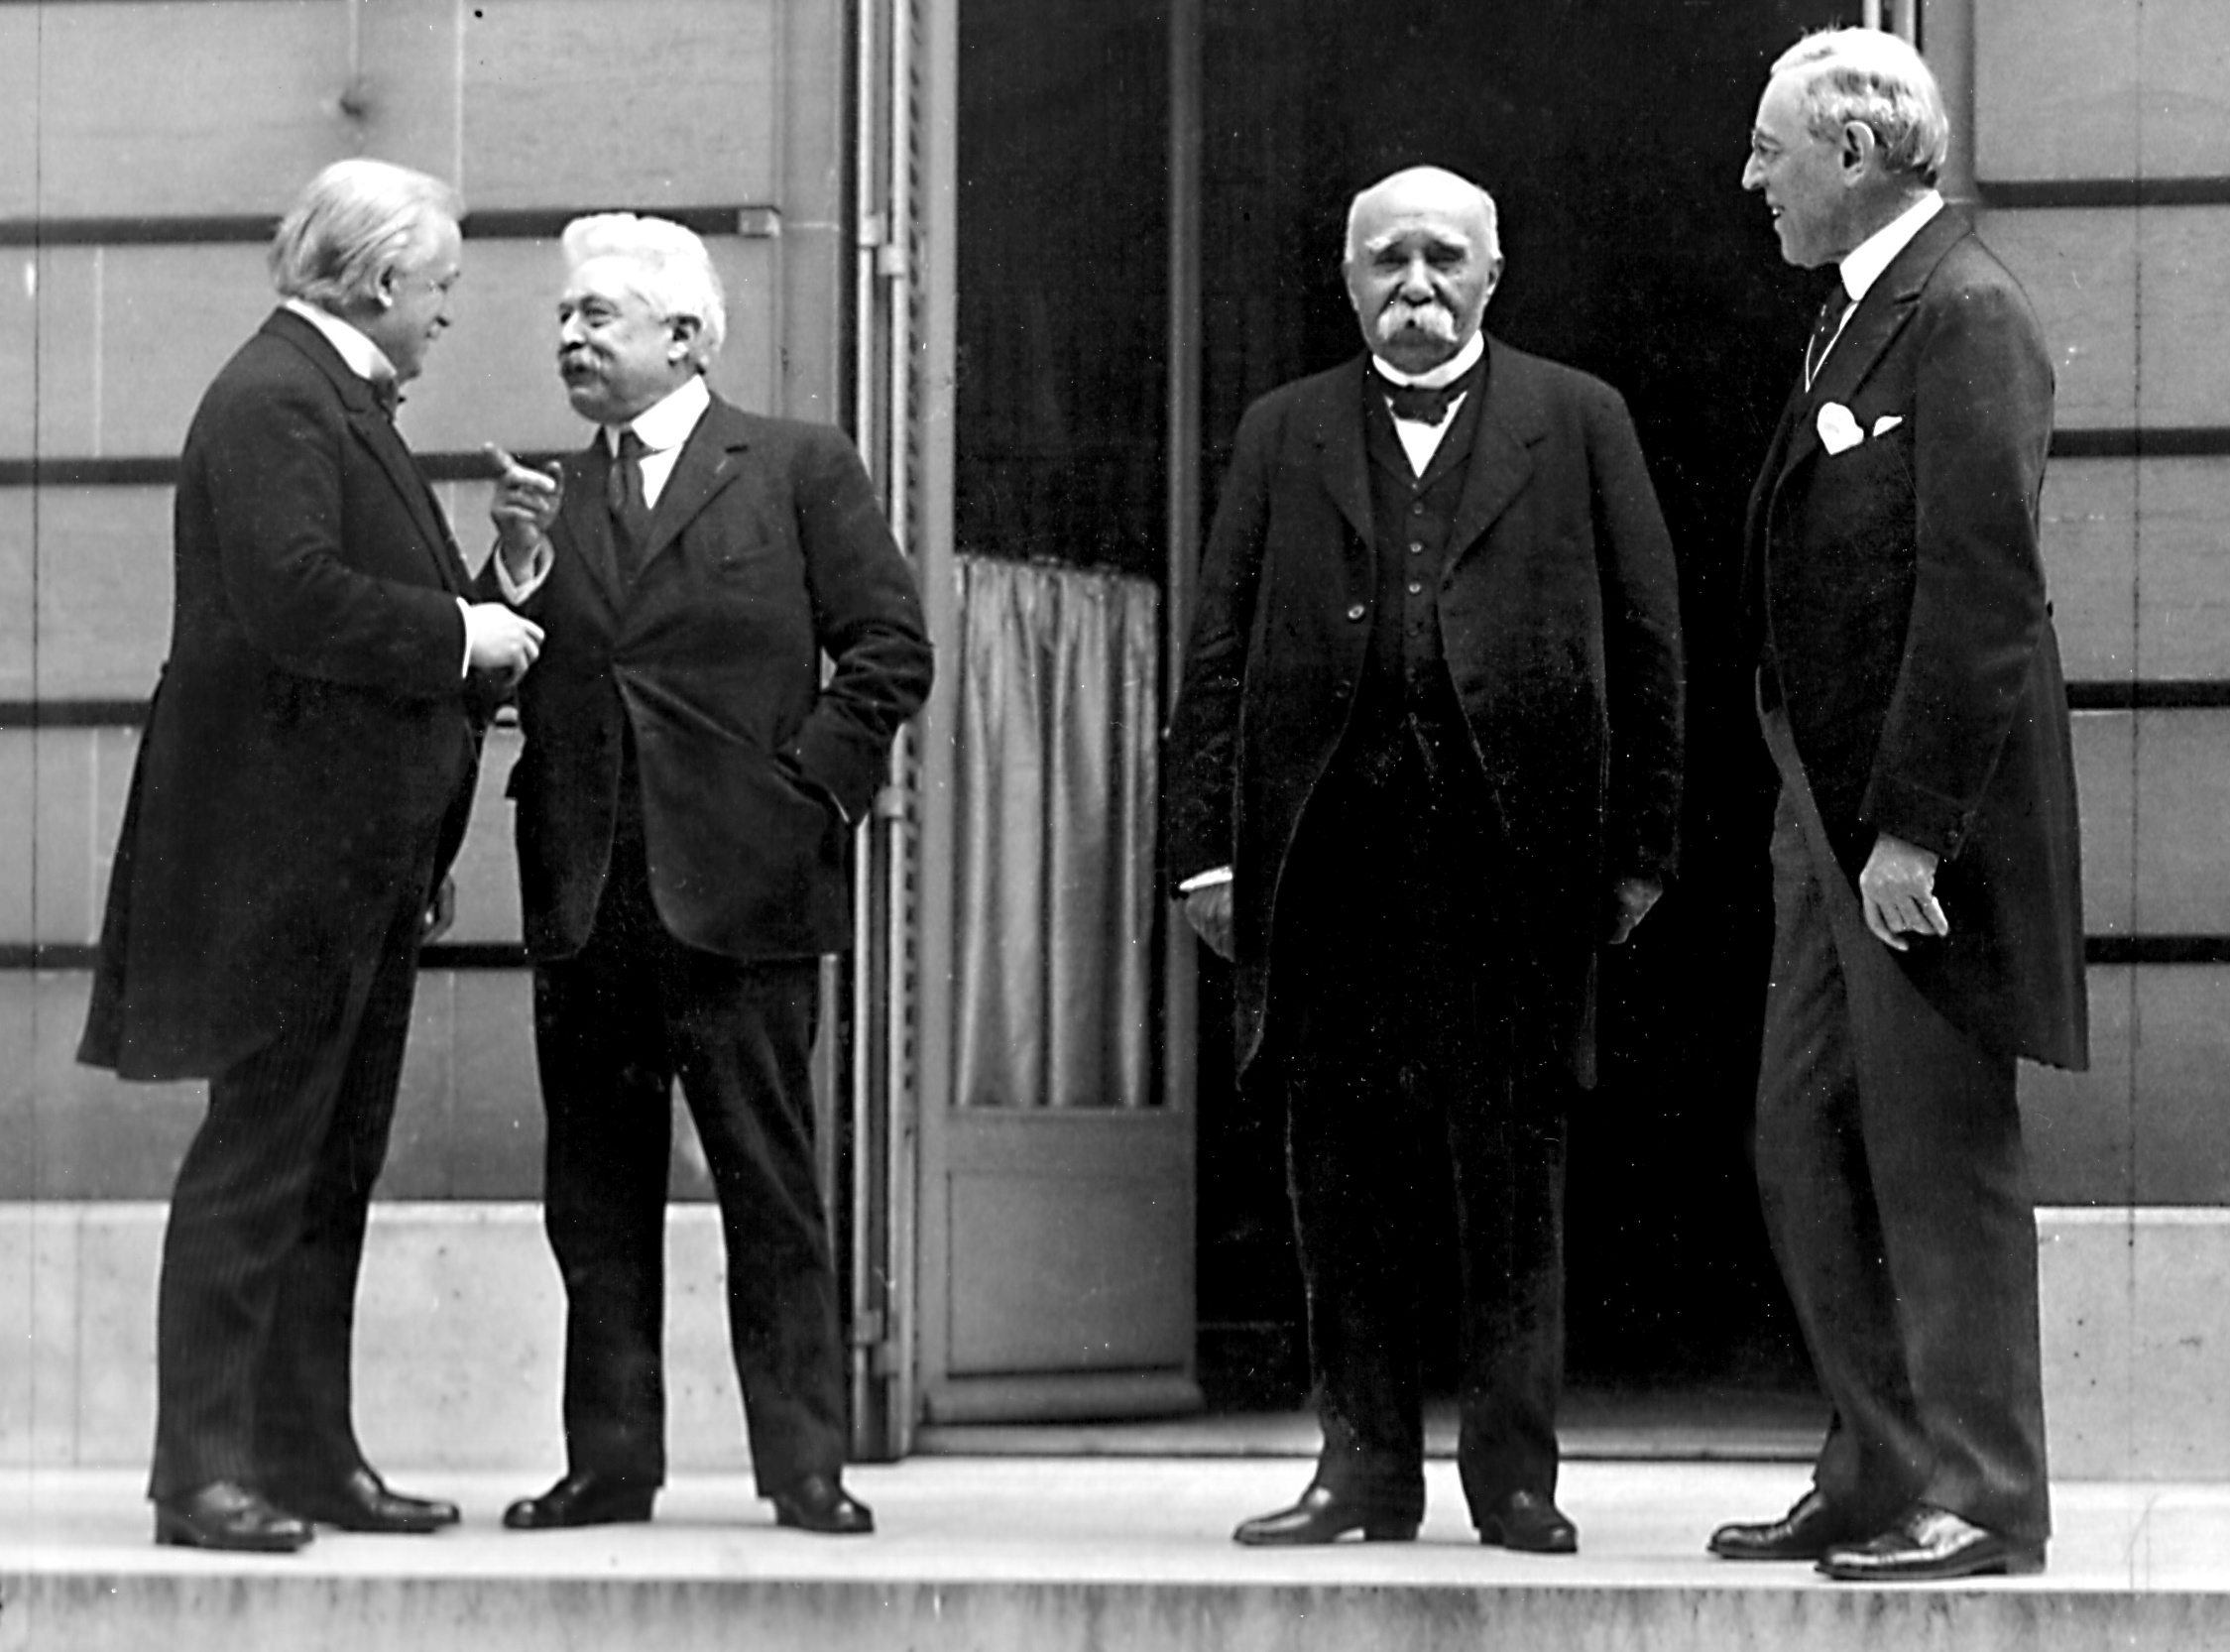 The Council of Four at the Paris Peace Conference, including British Prime Minister David Lloyd George, Italian Premier Vittorio Orlando, French Premier Georges Clemenceau, and US President Woodrow Wilson. Image courtesy Wikimedia.